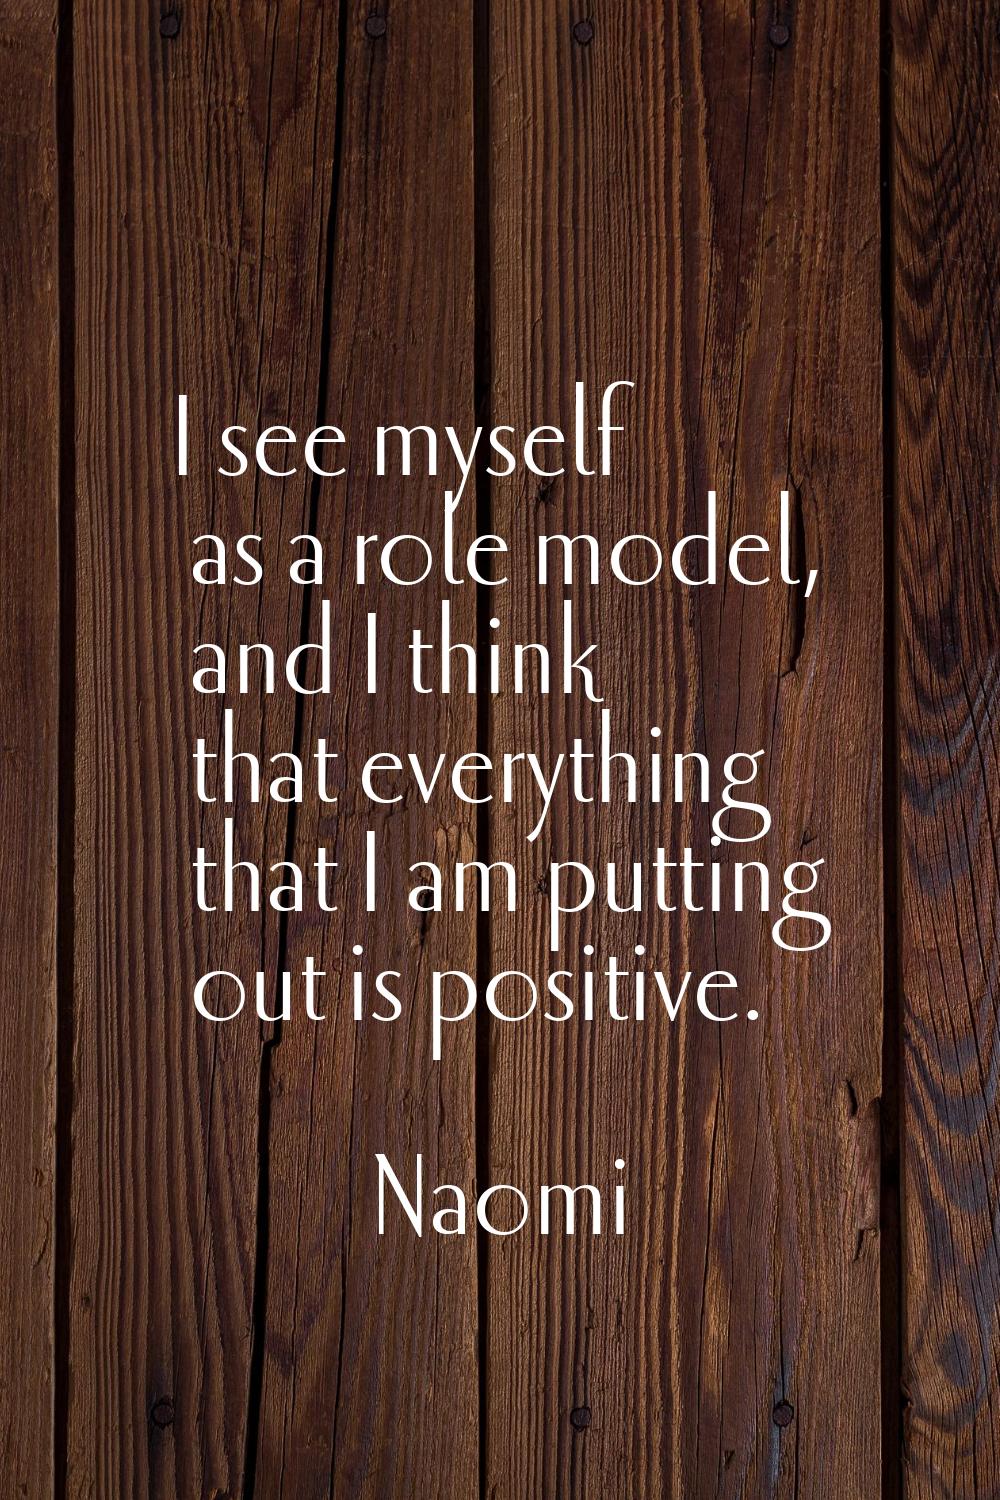 I see myself as a role model, and I think that everything that I am putting out is positive.